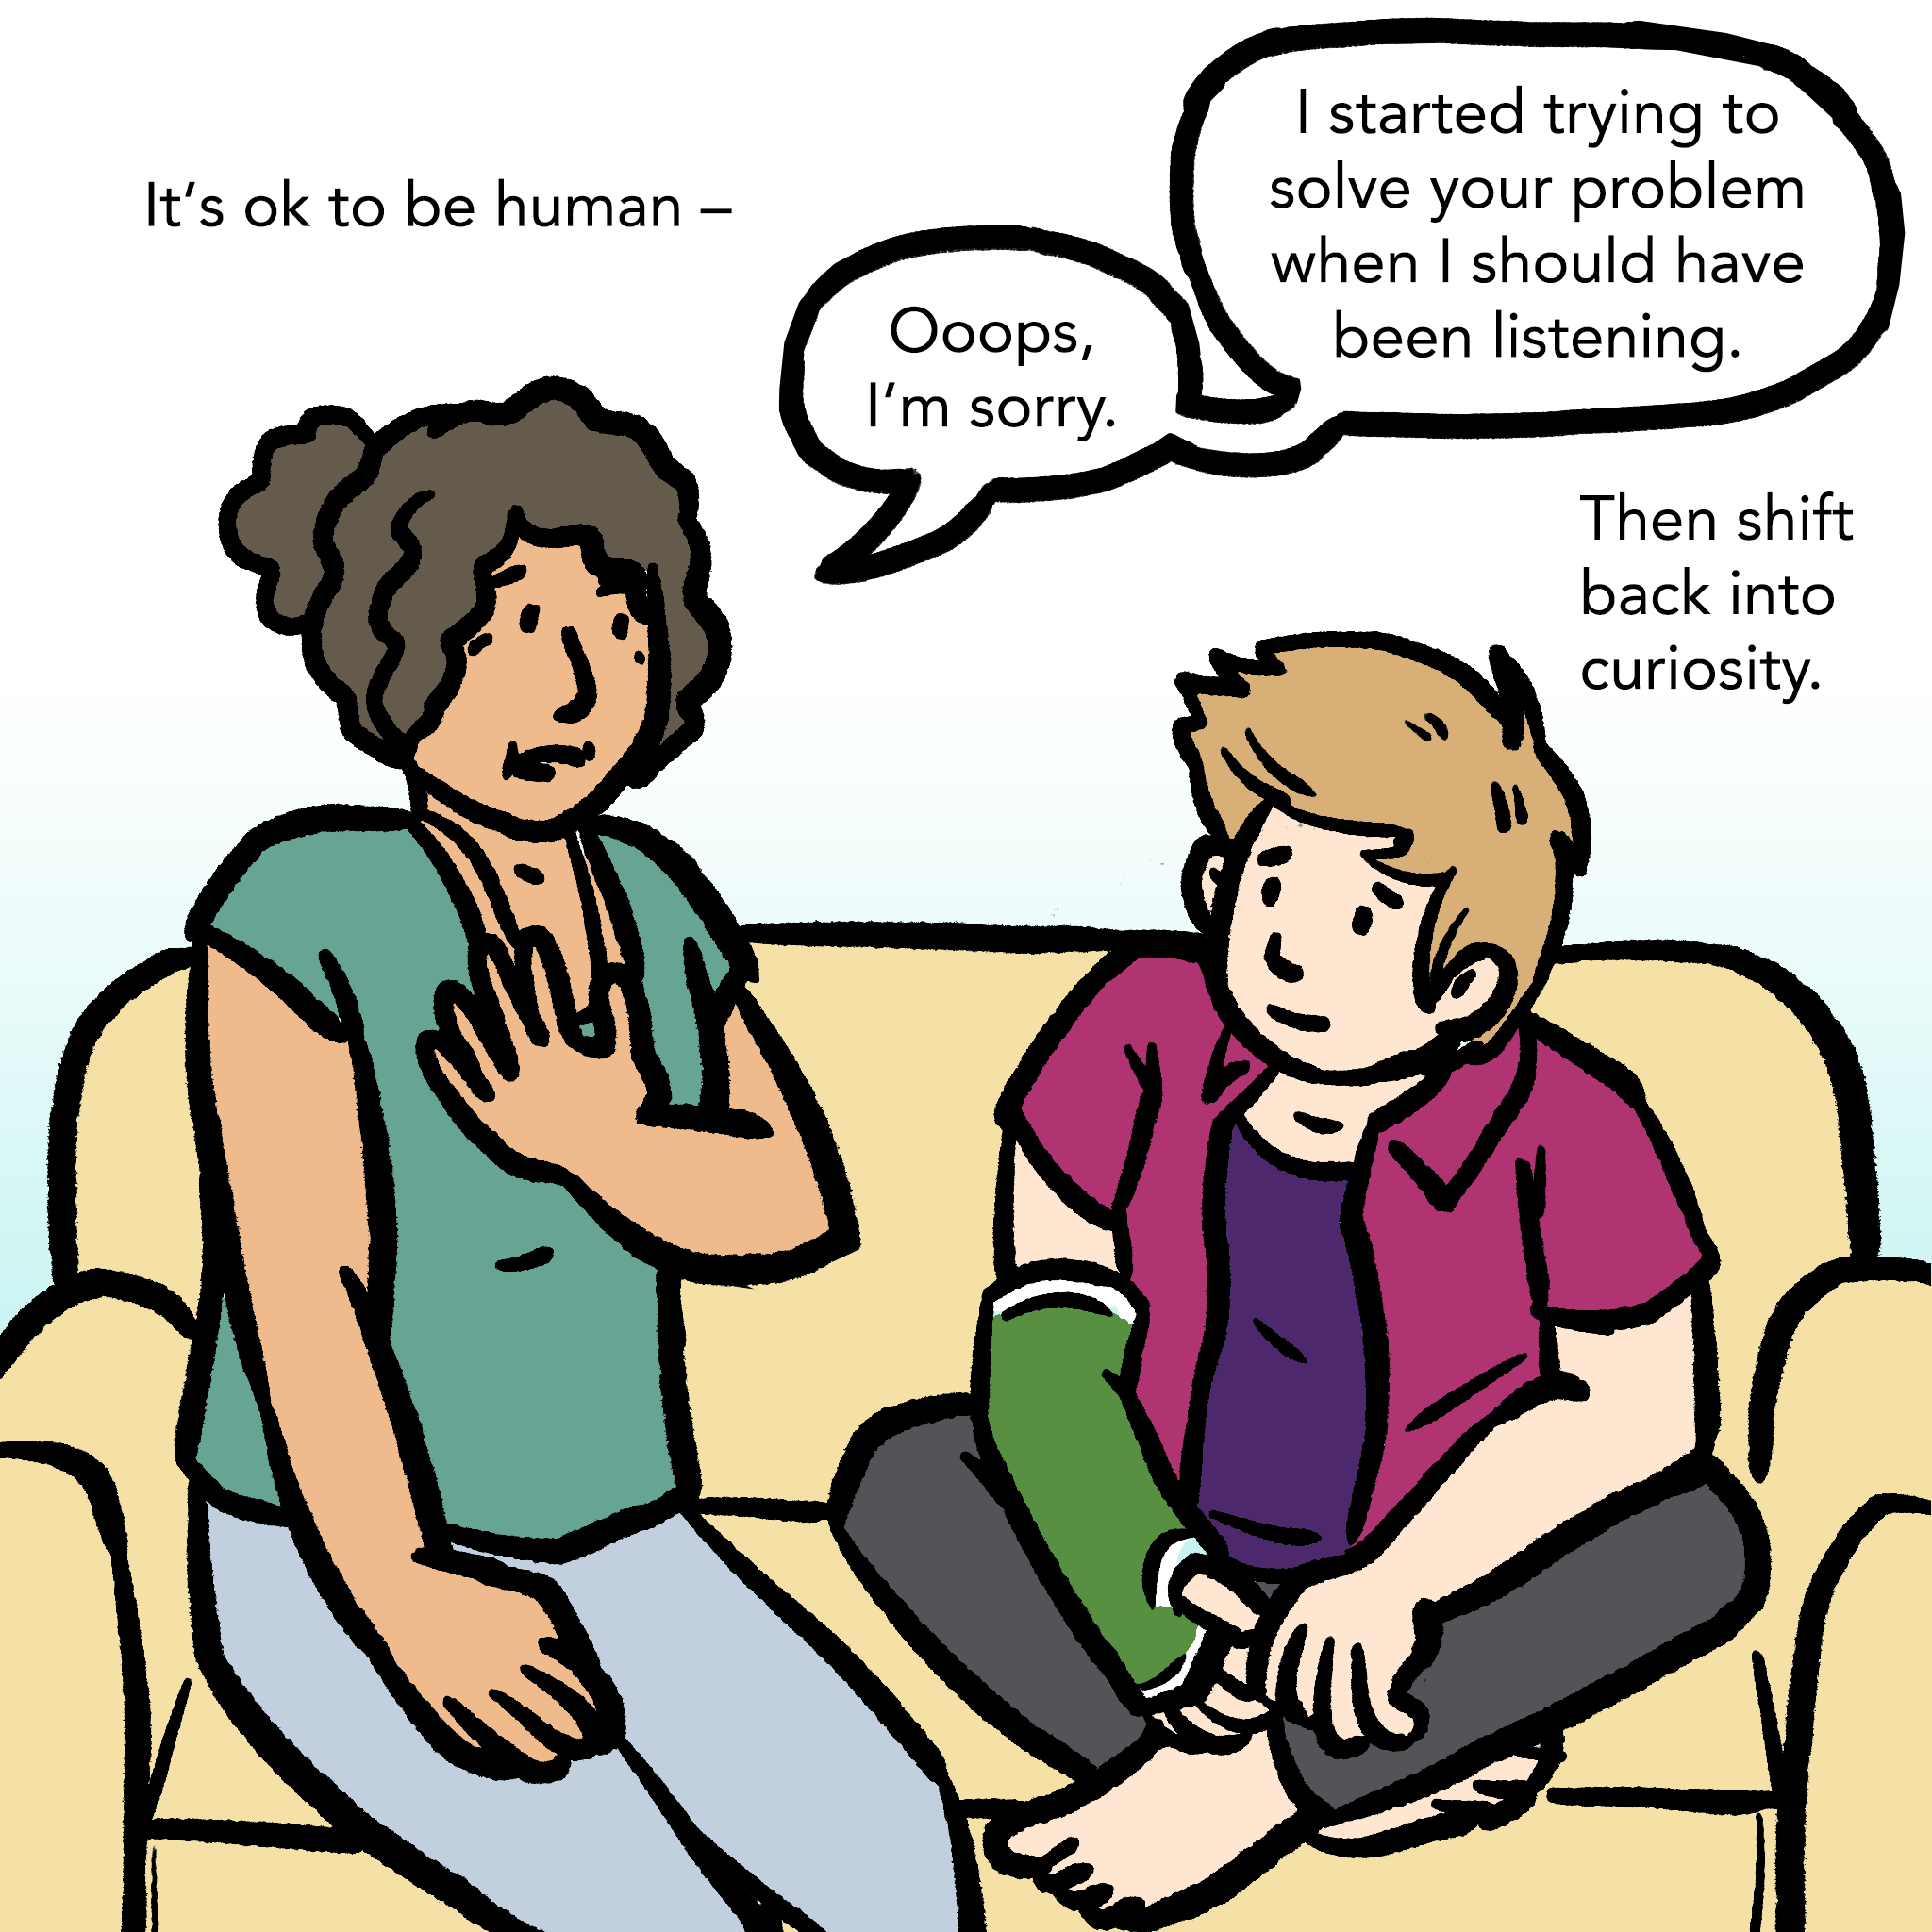 Illustration of an adult and a youth sitting on a couch. Adult has their hand to their chest in a gesture of humility. Youth is looking at the adult with an open expression. Caption says "It's ok to be human." Word bubble shows adult saying "Oops, I'm sorry. I started trying to solve your problem when I should have been listening." Caption says "Then shift back into curiosity."